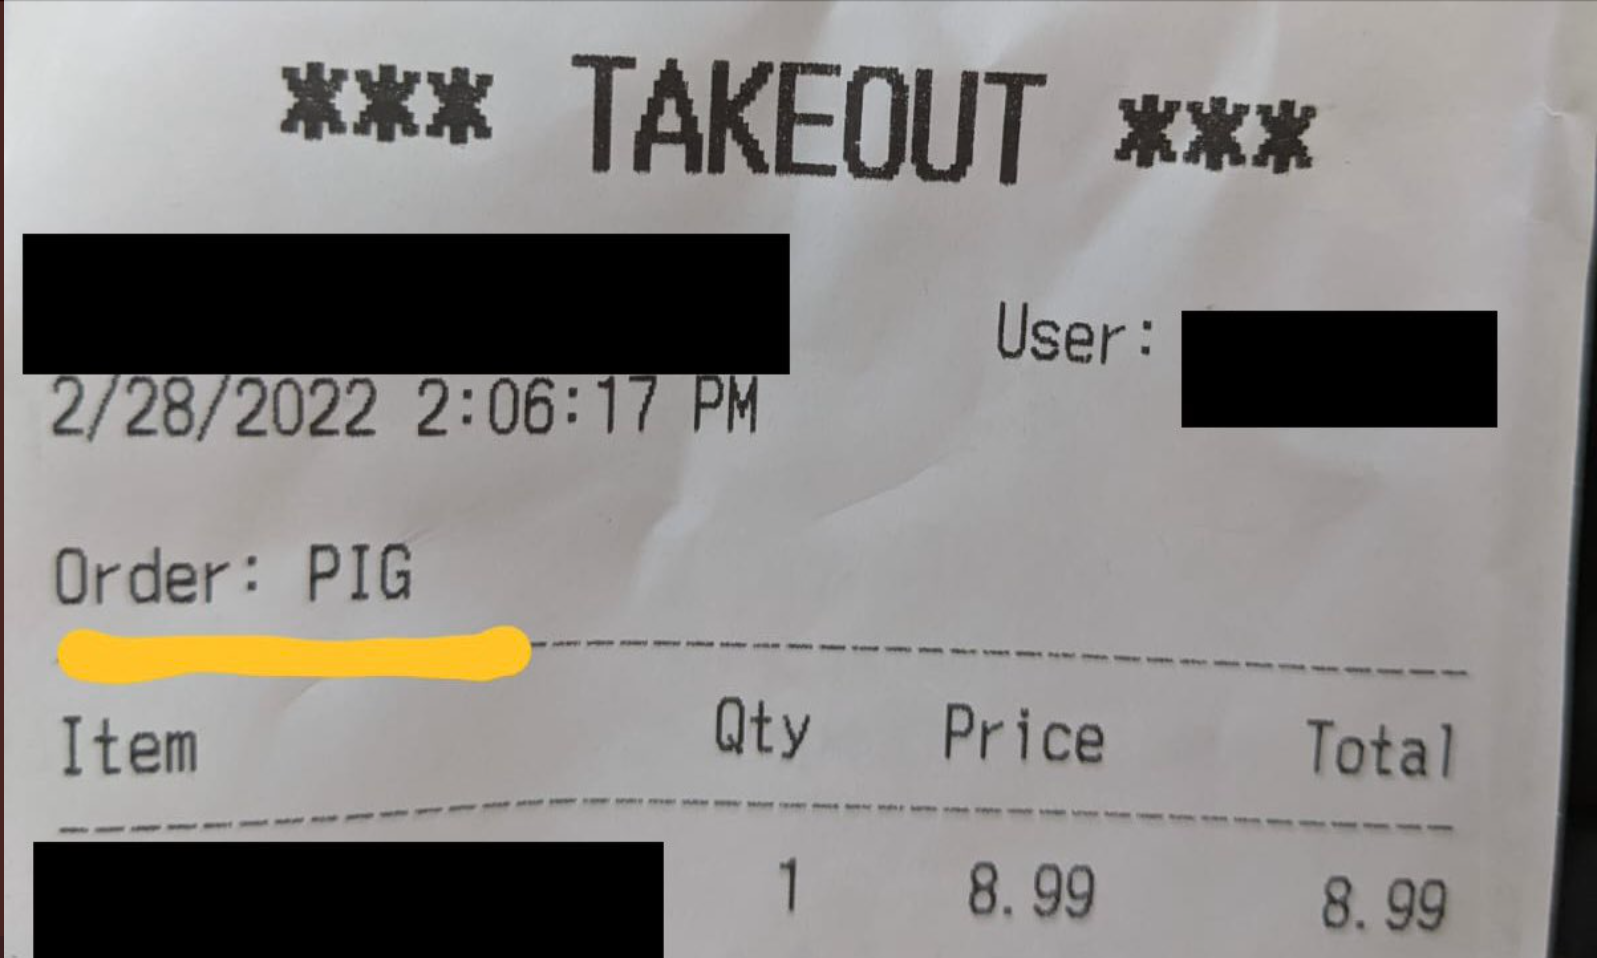 looked at his receipt, he saw the name on the order said ‘PIG.’